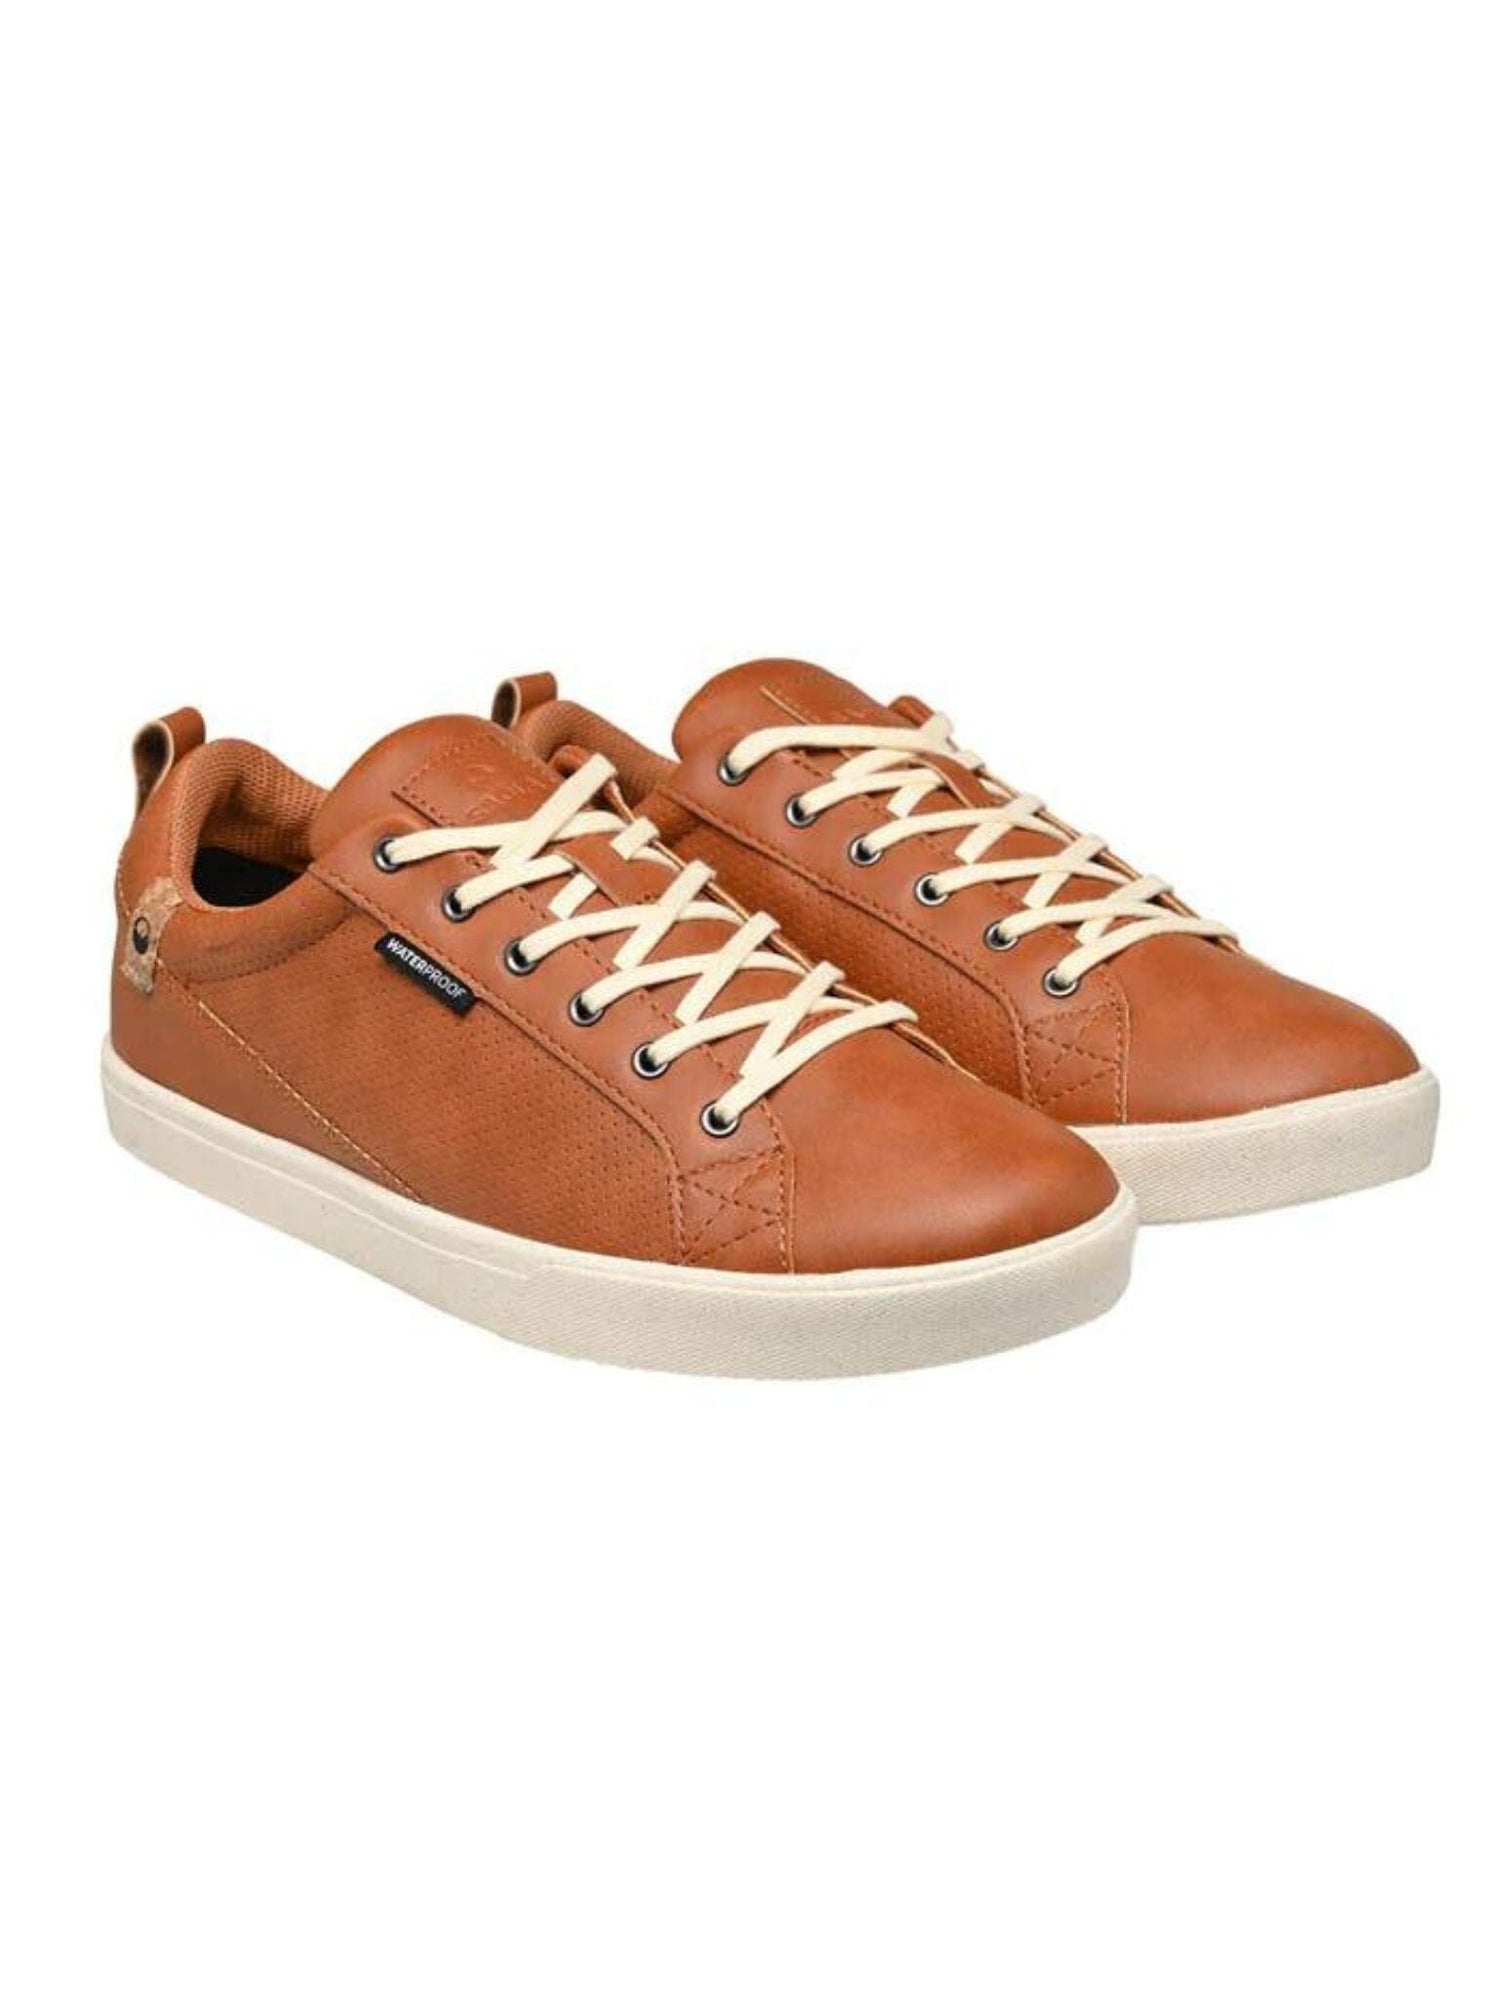 Saola W's Cannon Waterproof Sneakers - Recycled PET and bio-sourced materials Caramel Shoes